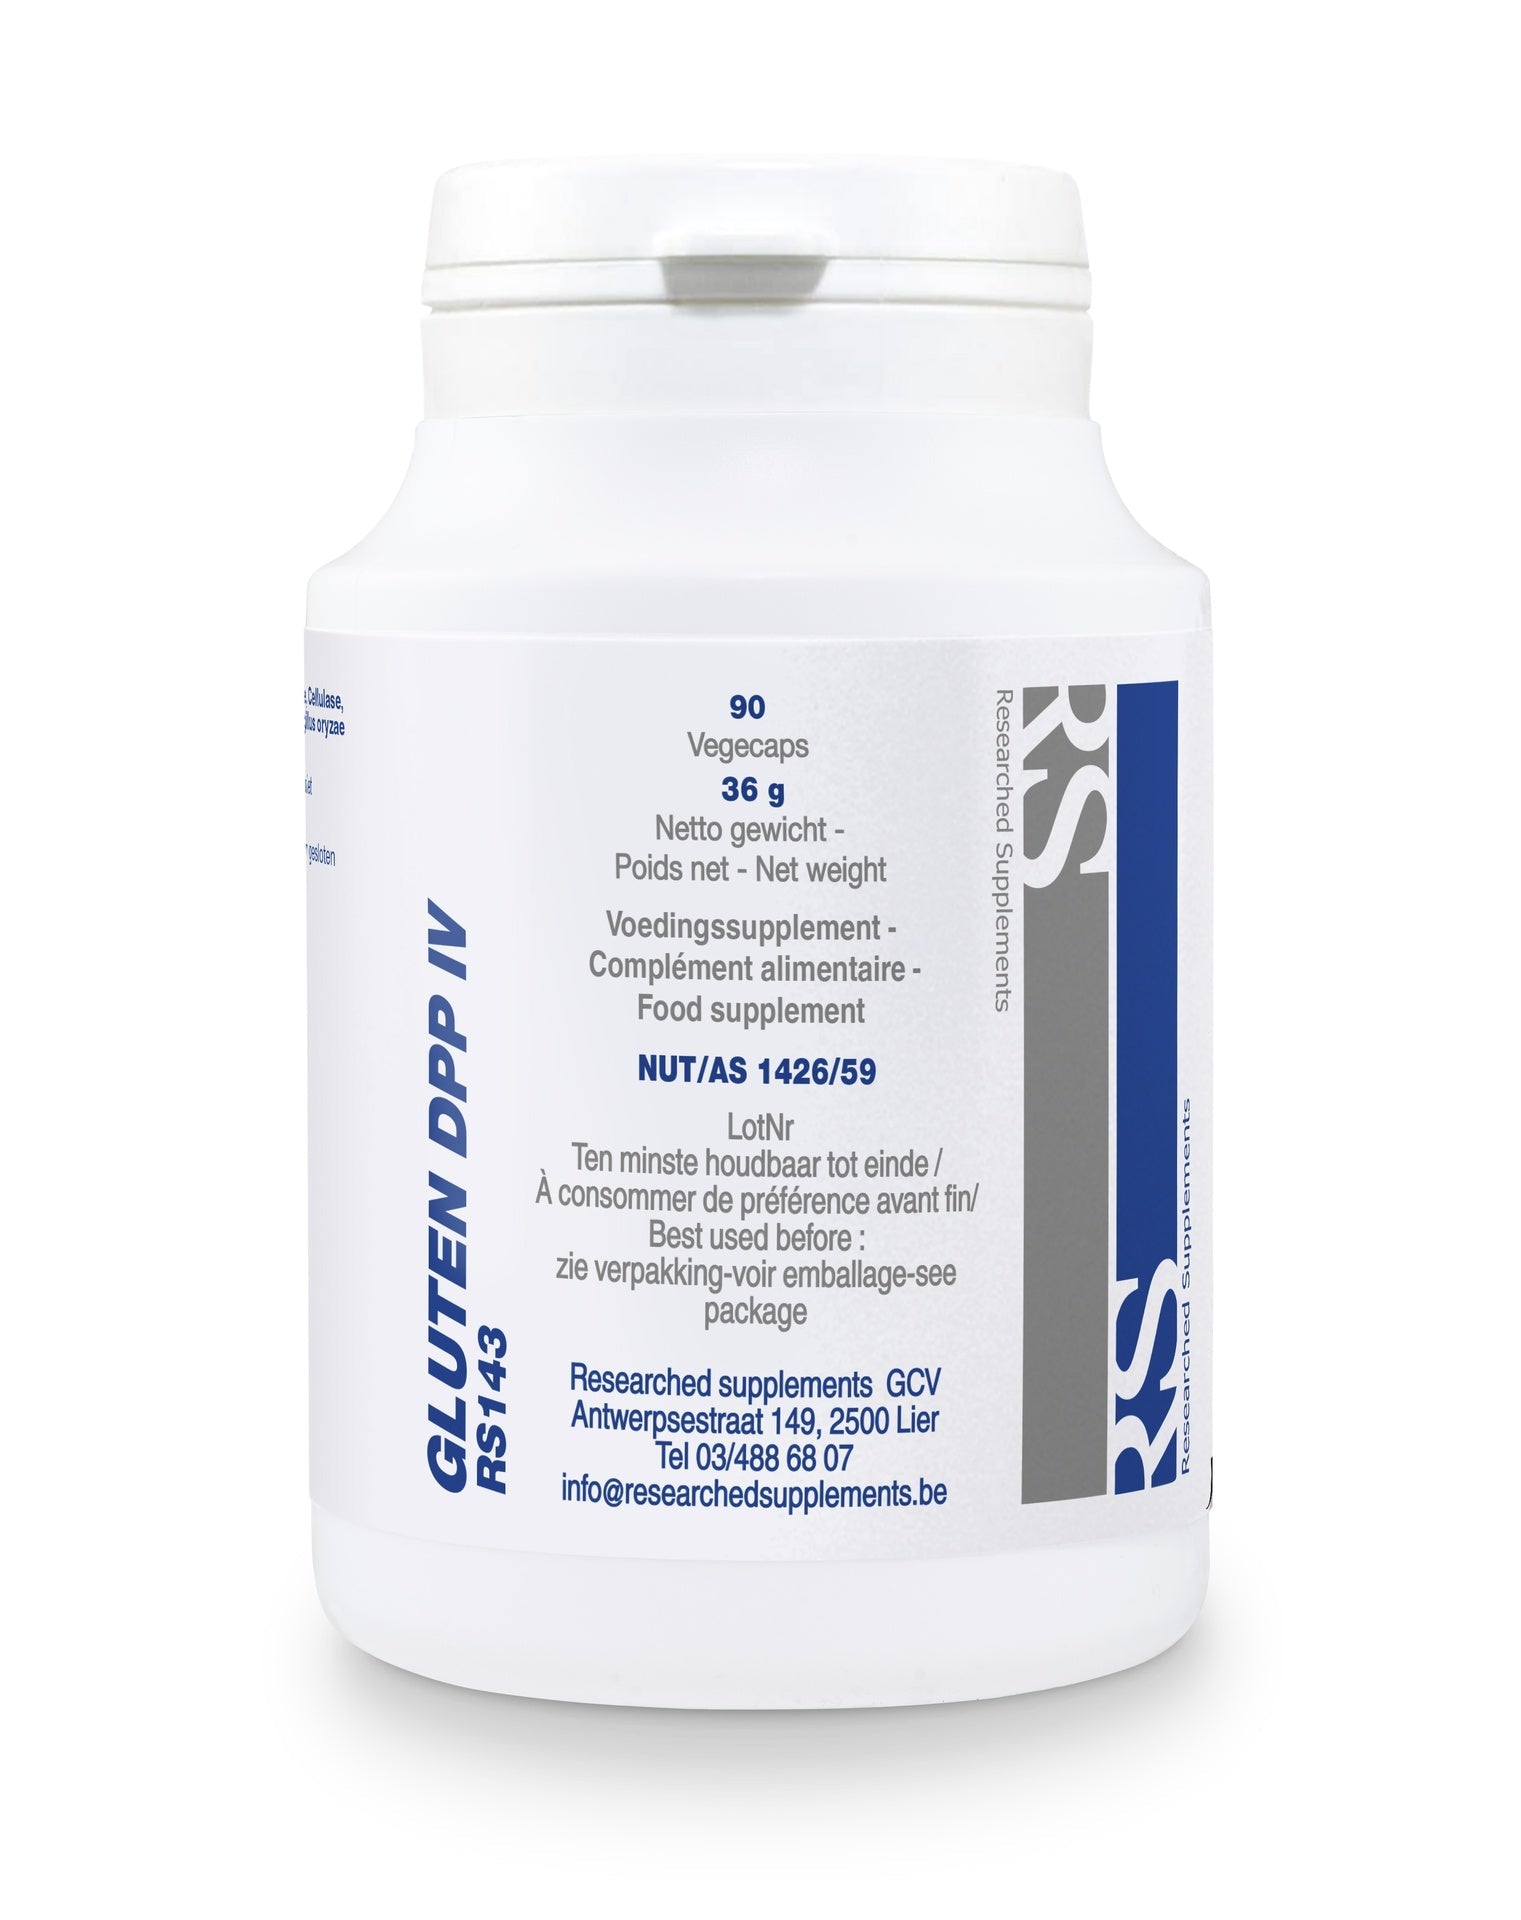 Gluten DPP-IV Complex - 90 Capsules | Researched Supplements